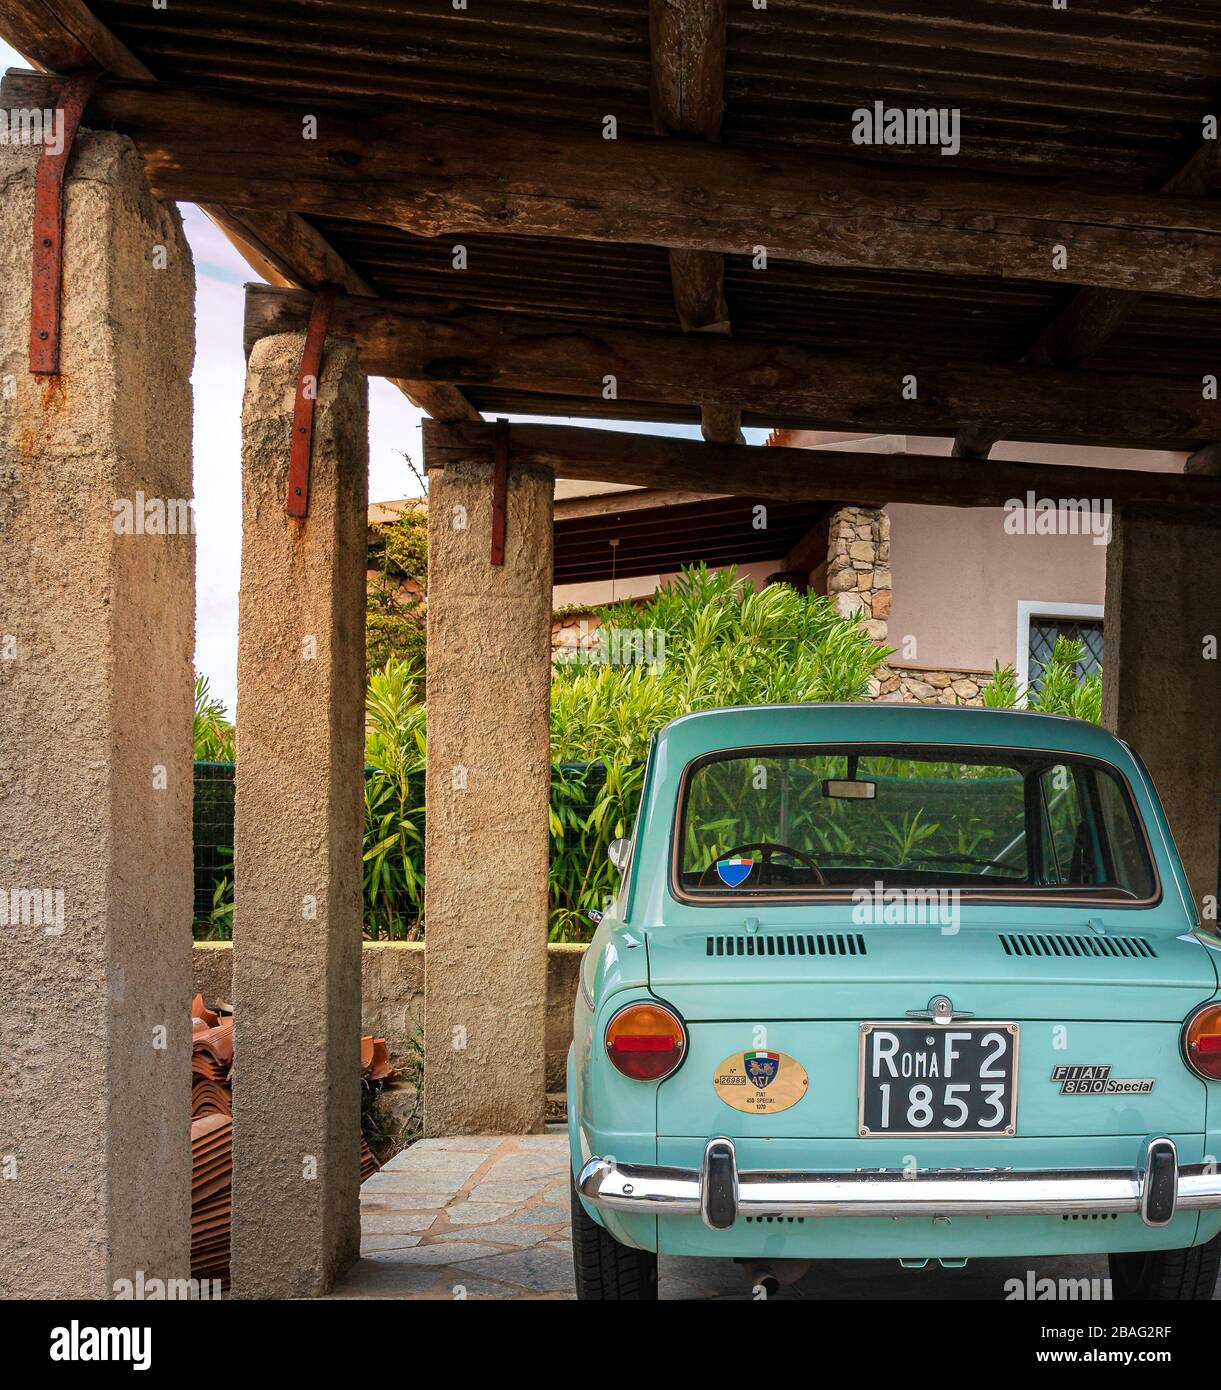 Sardinia; Italy; an old fiat 850 of the special edition roma stands in a garage on the island Stock Photo